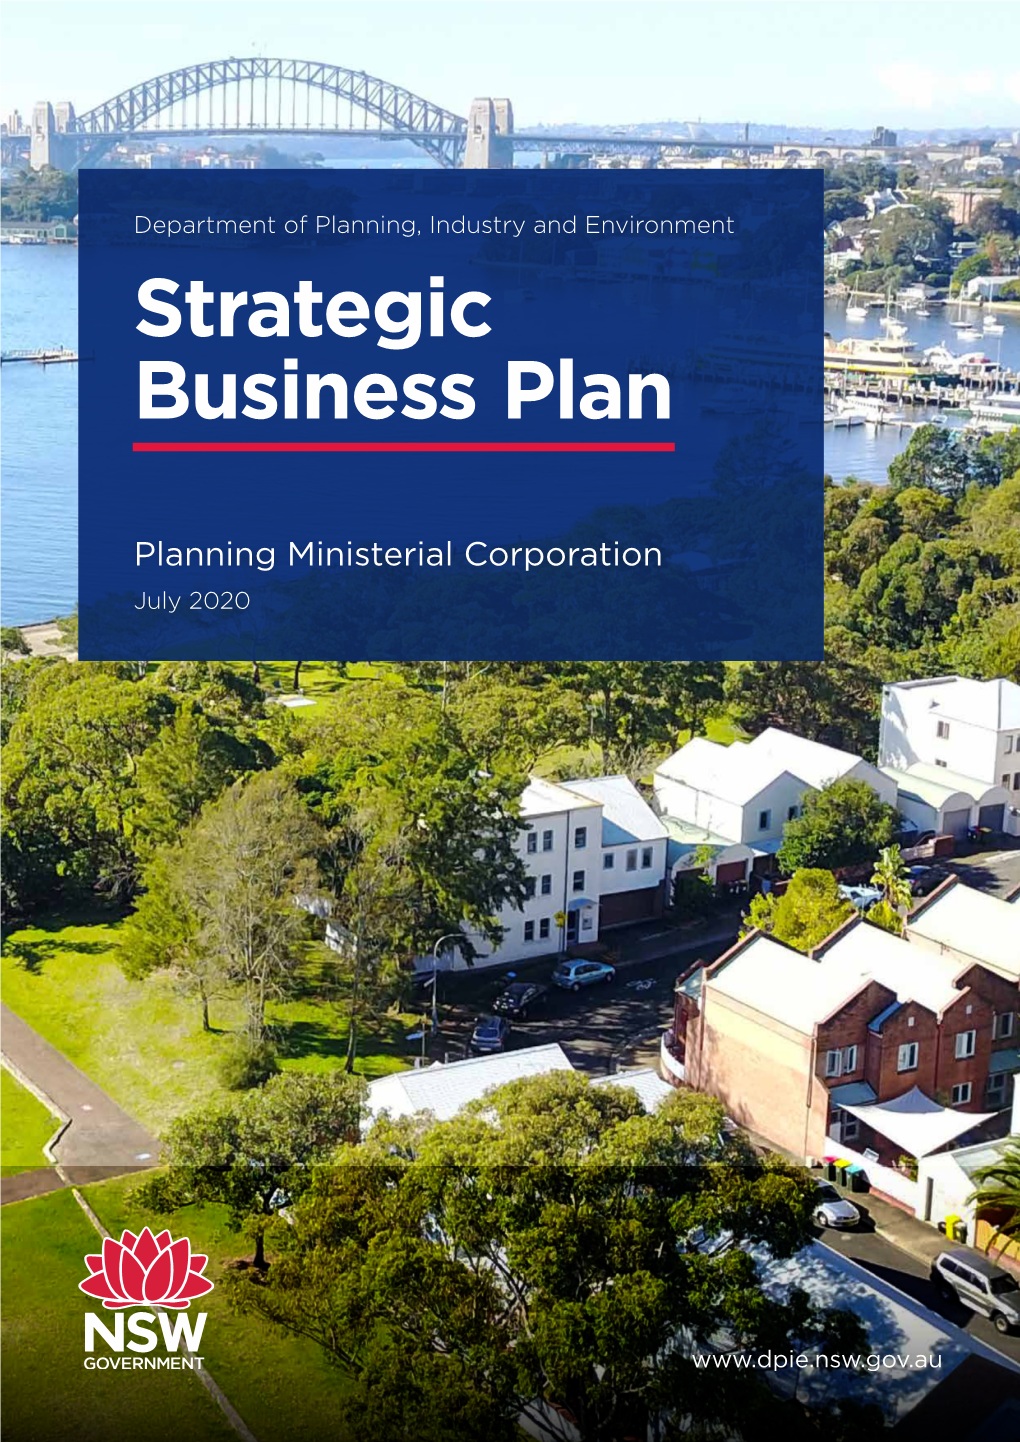 Download the Strategic Business Plan